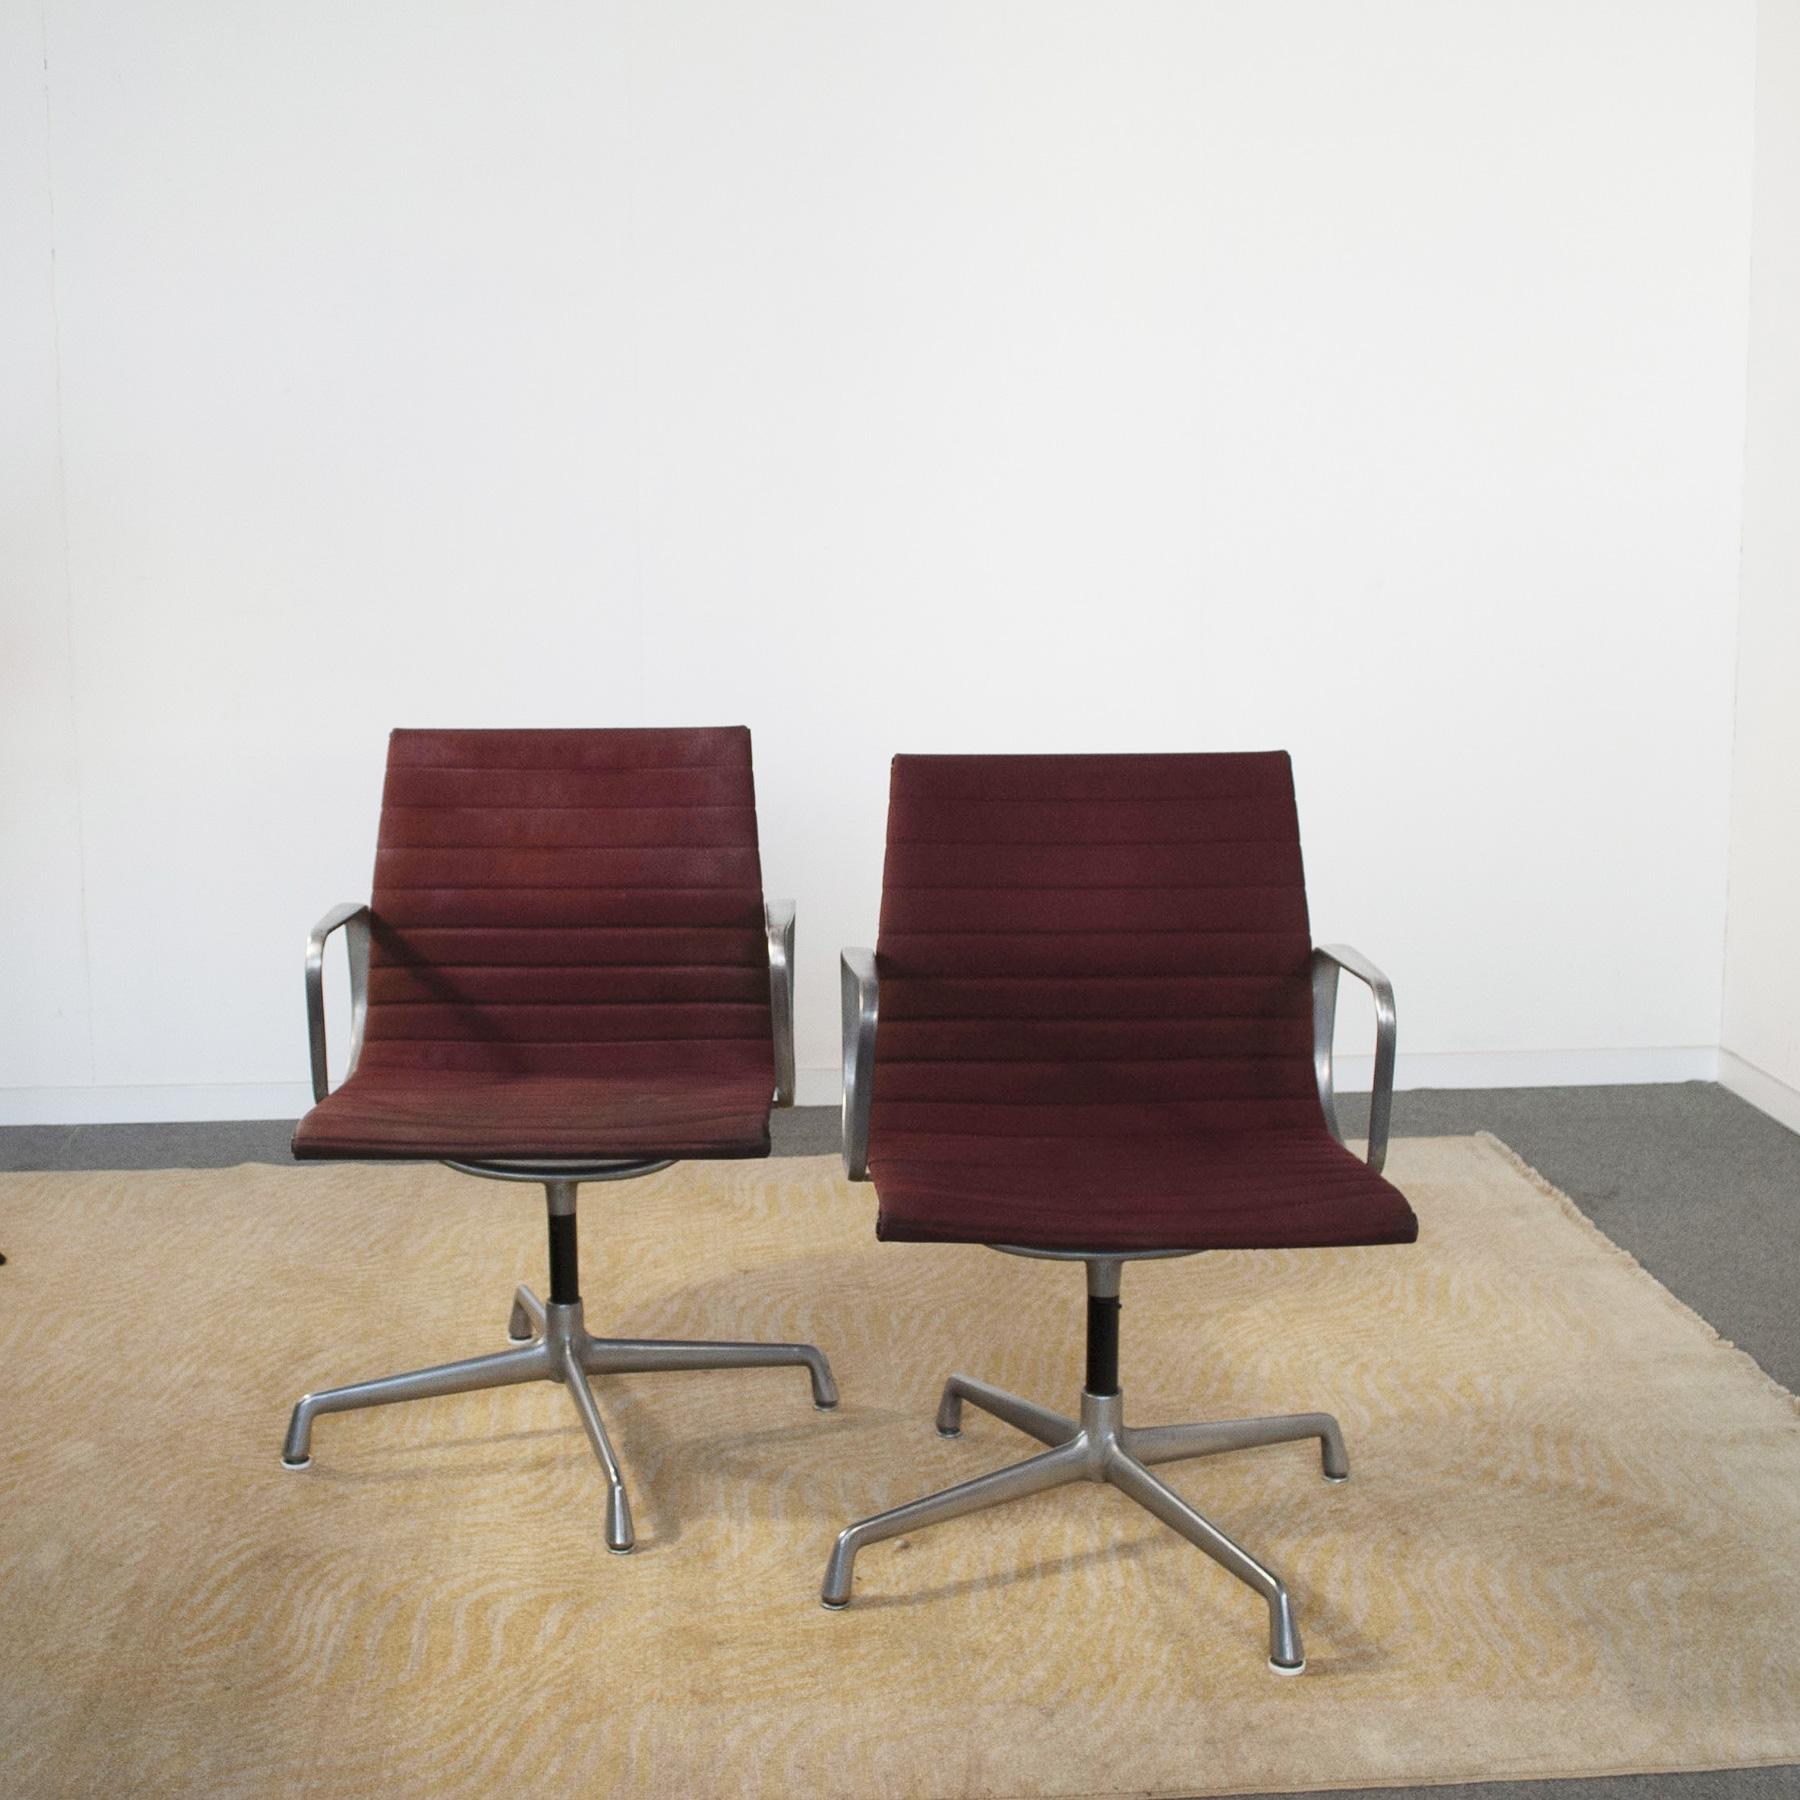 Charles Eames Lounge Chairs for Herman Miller In Good Condition For Sale In bari, IT